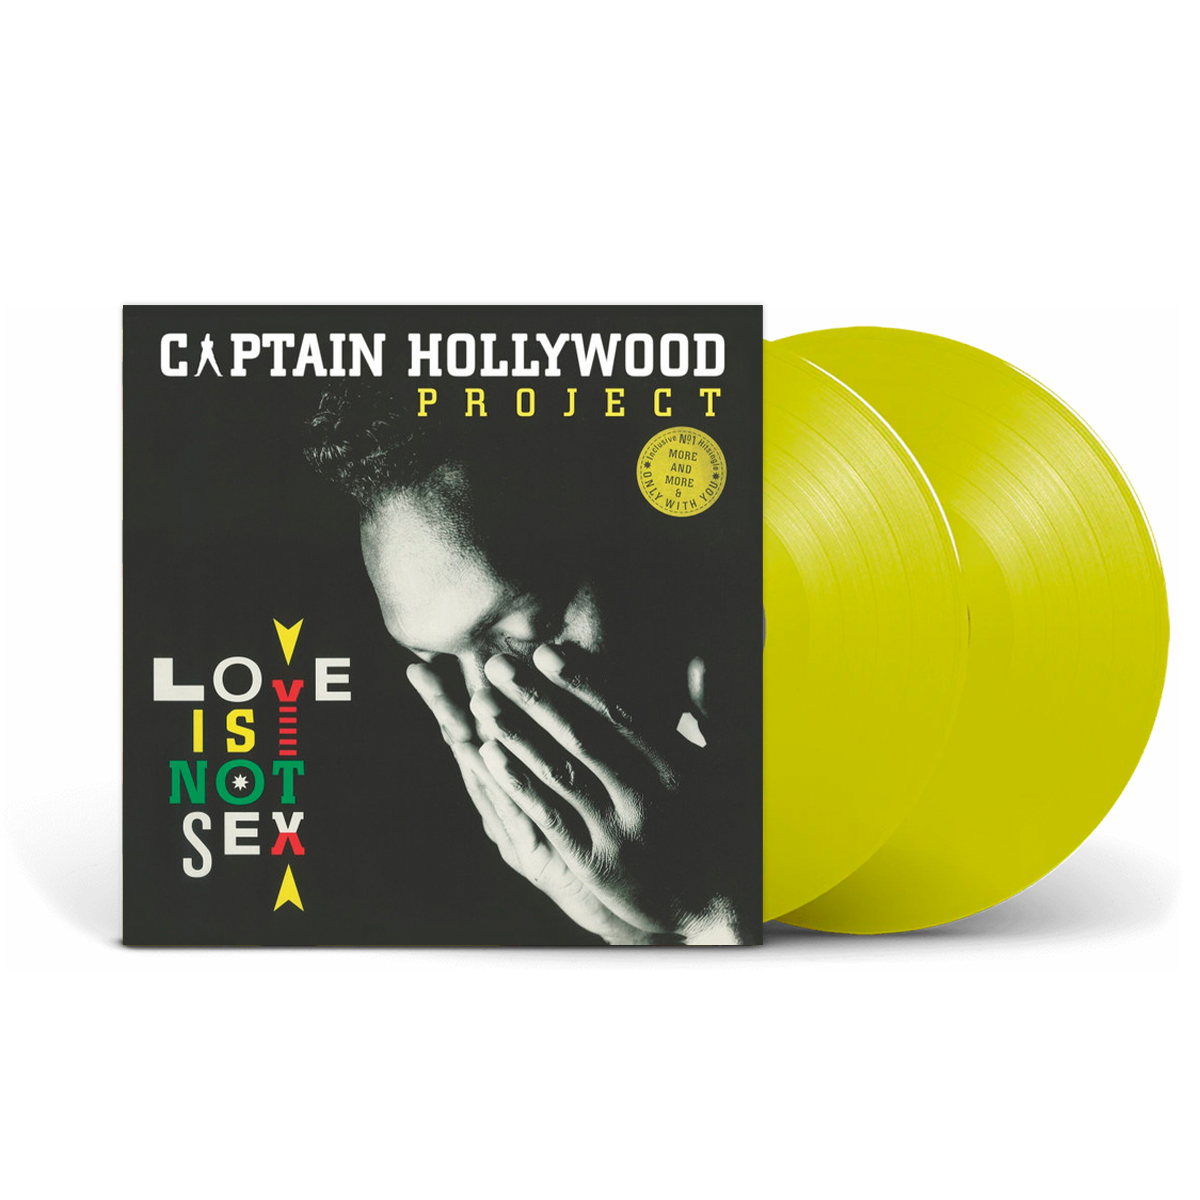 Виниловые пластинки 2LP: Captain Hollywood Project — «Love Is Not Sex» (2021) [Limited Edition Yellow Vinyl]